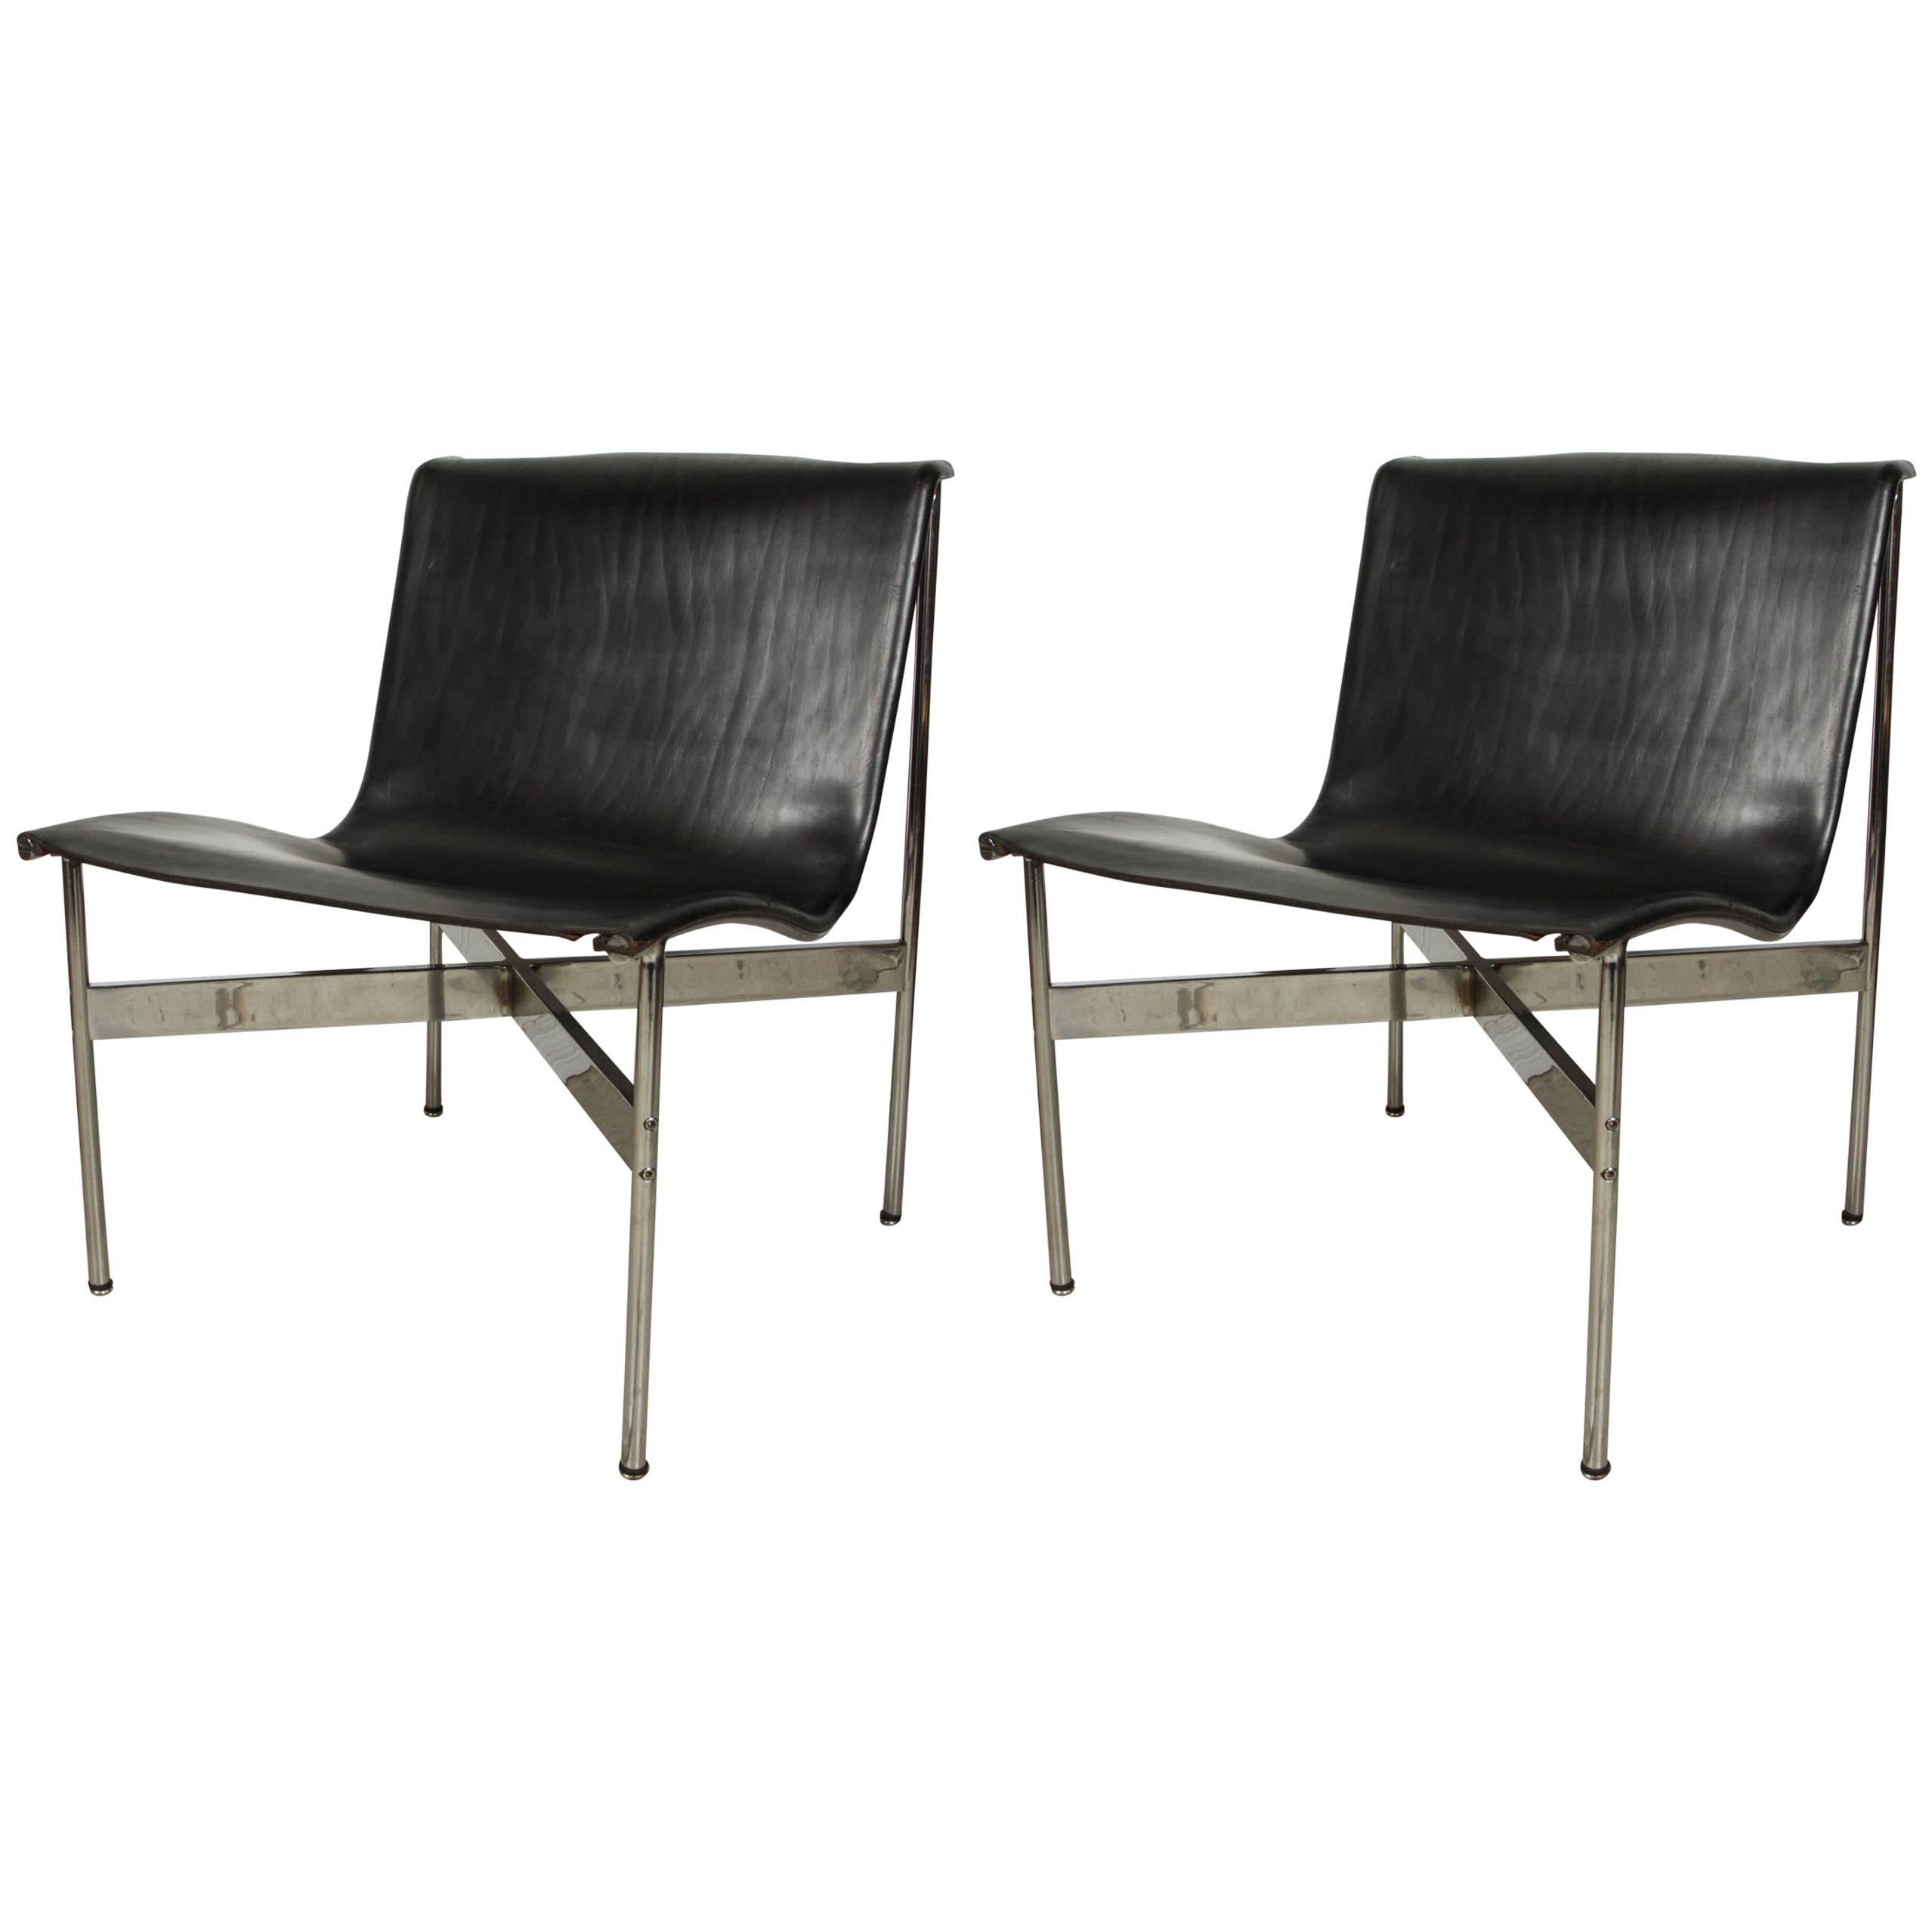 Pair of Leather and chrome chairs by Katavalos, Littell, and Kelly